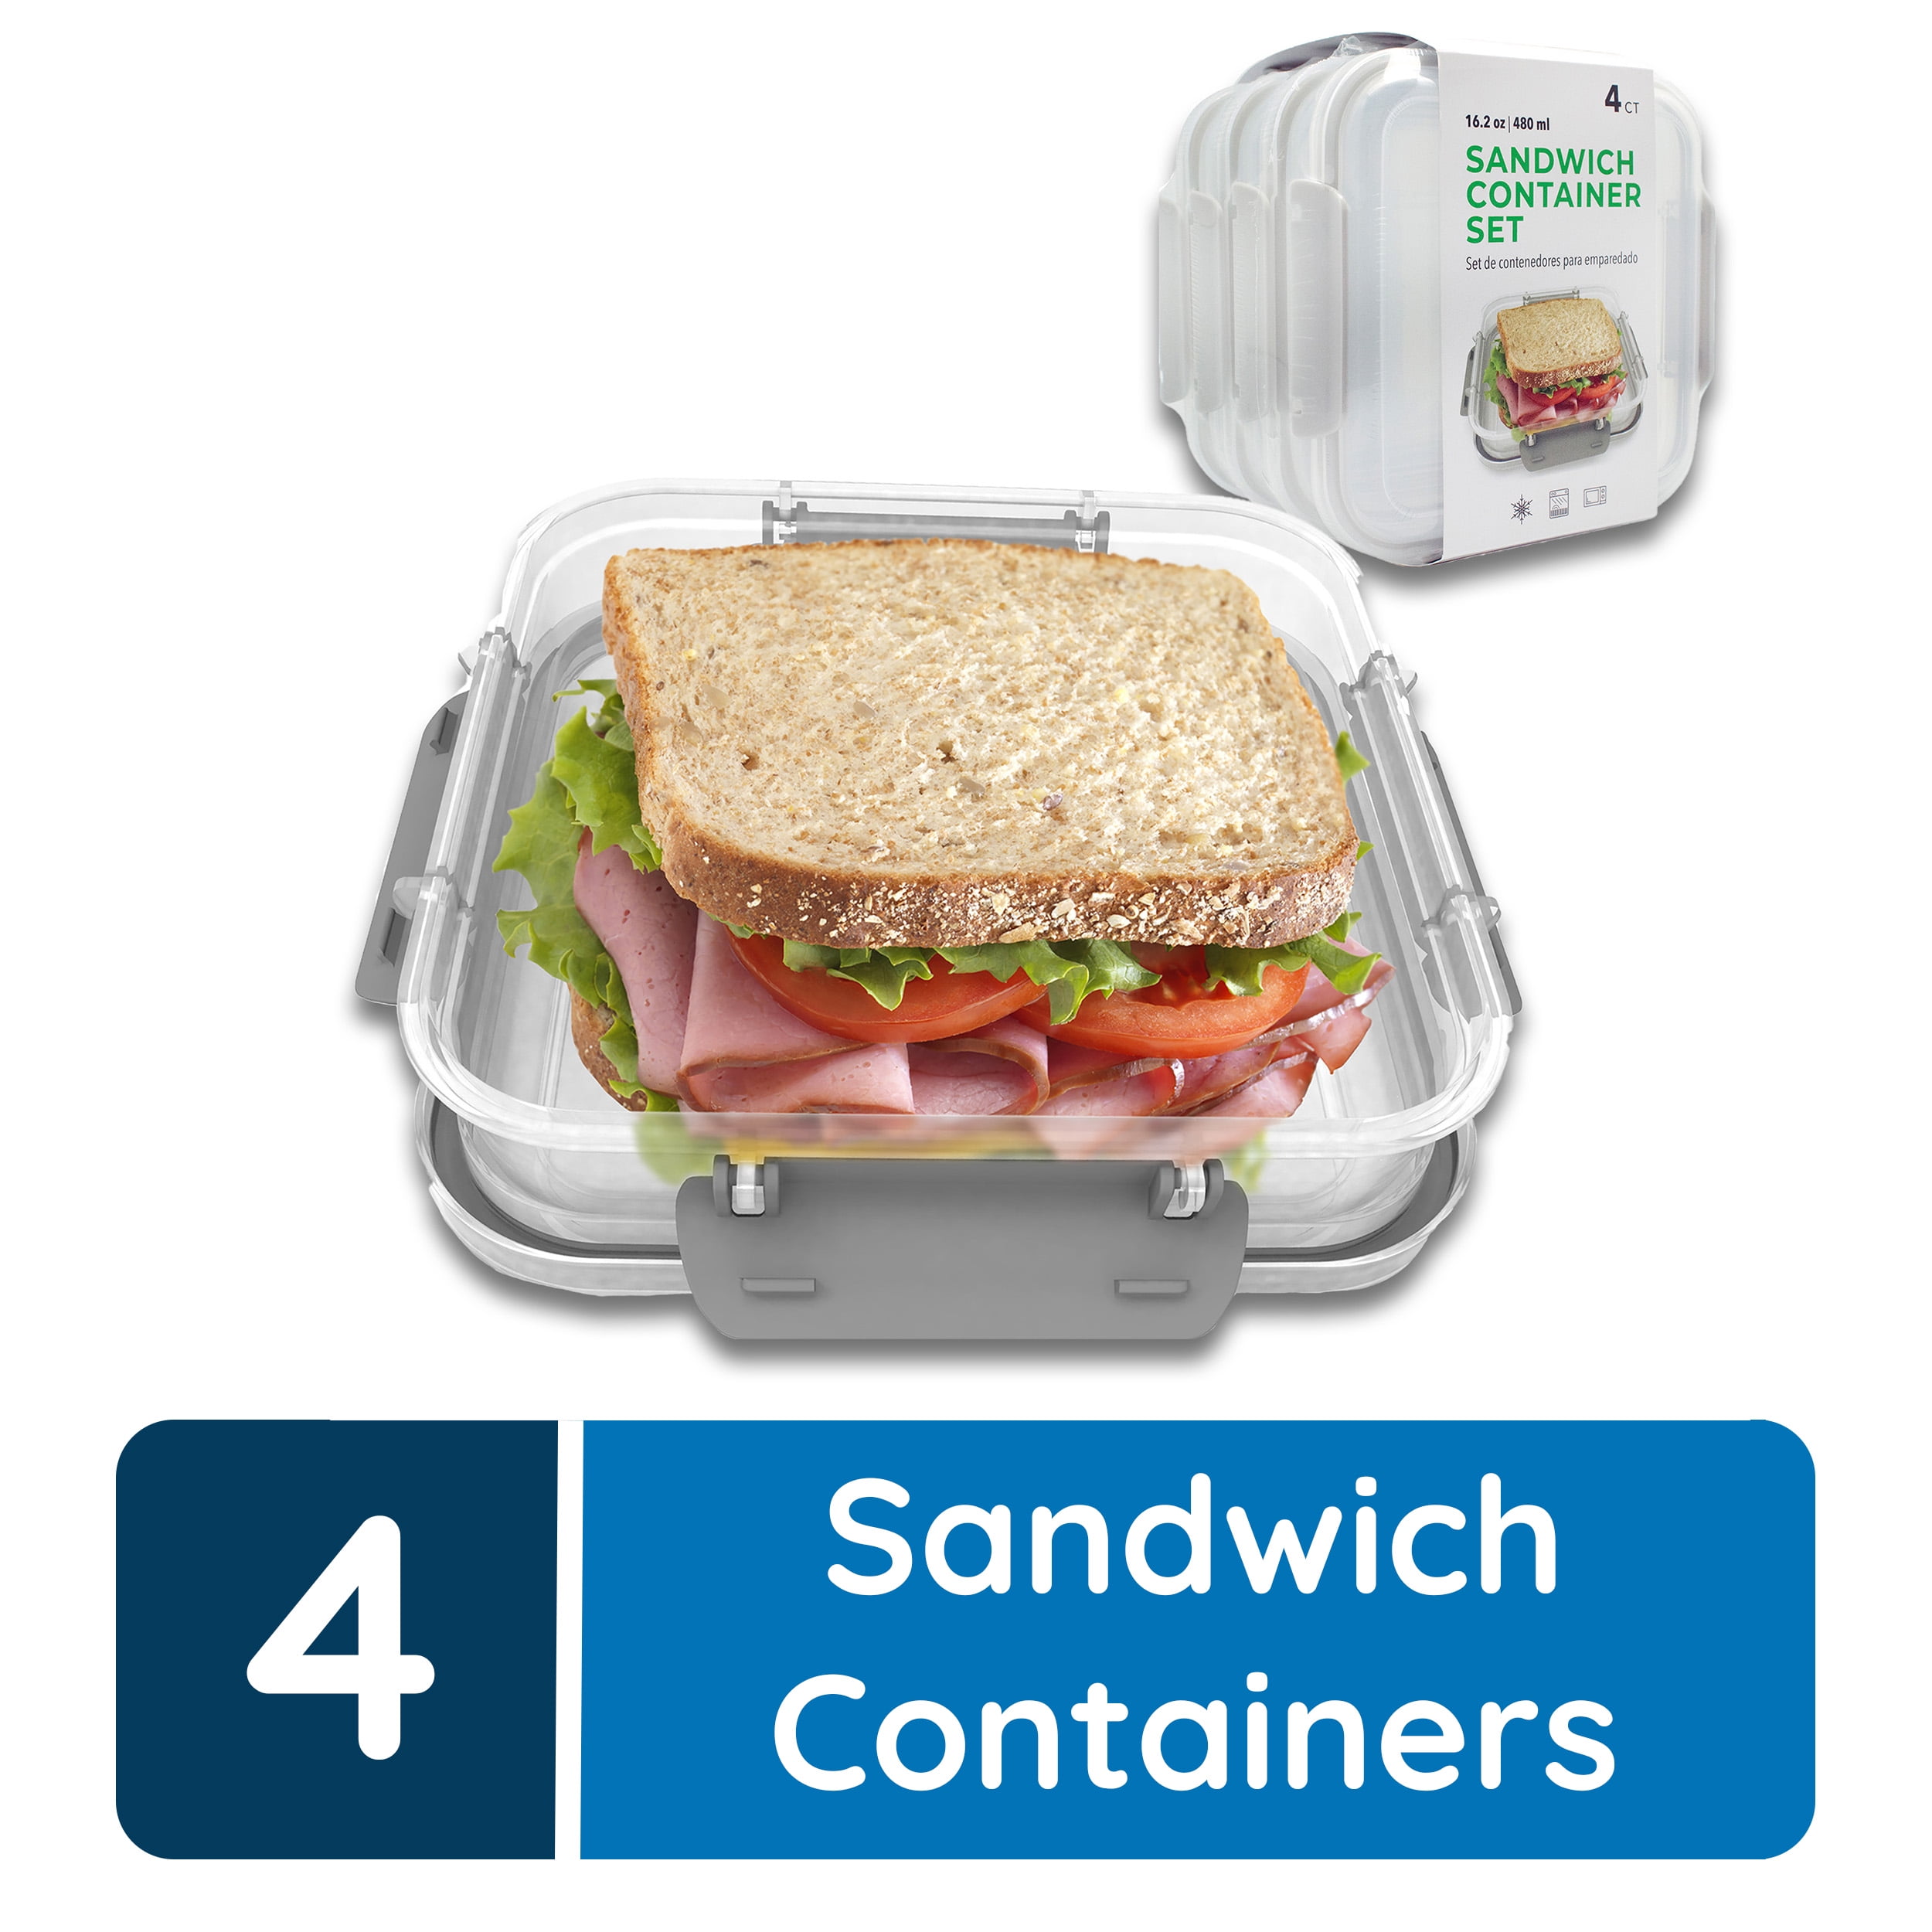 Snap Fresh - 4 Pack of Sandwich Containers (450 ml) - Reusable, BPA Free  Plastic, Snap & Lock Shut Lids and Silicone Seal. Great for Fruit, Salad